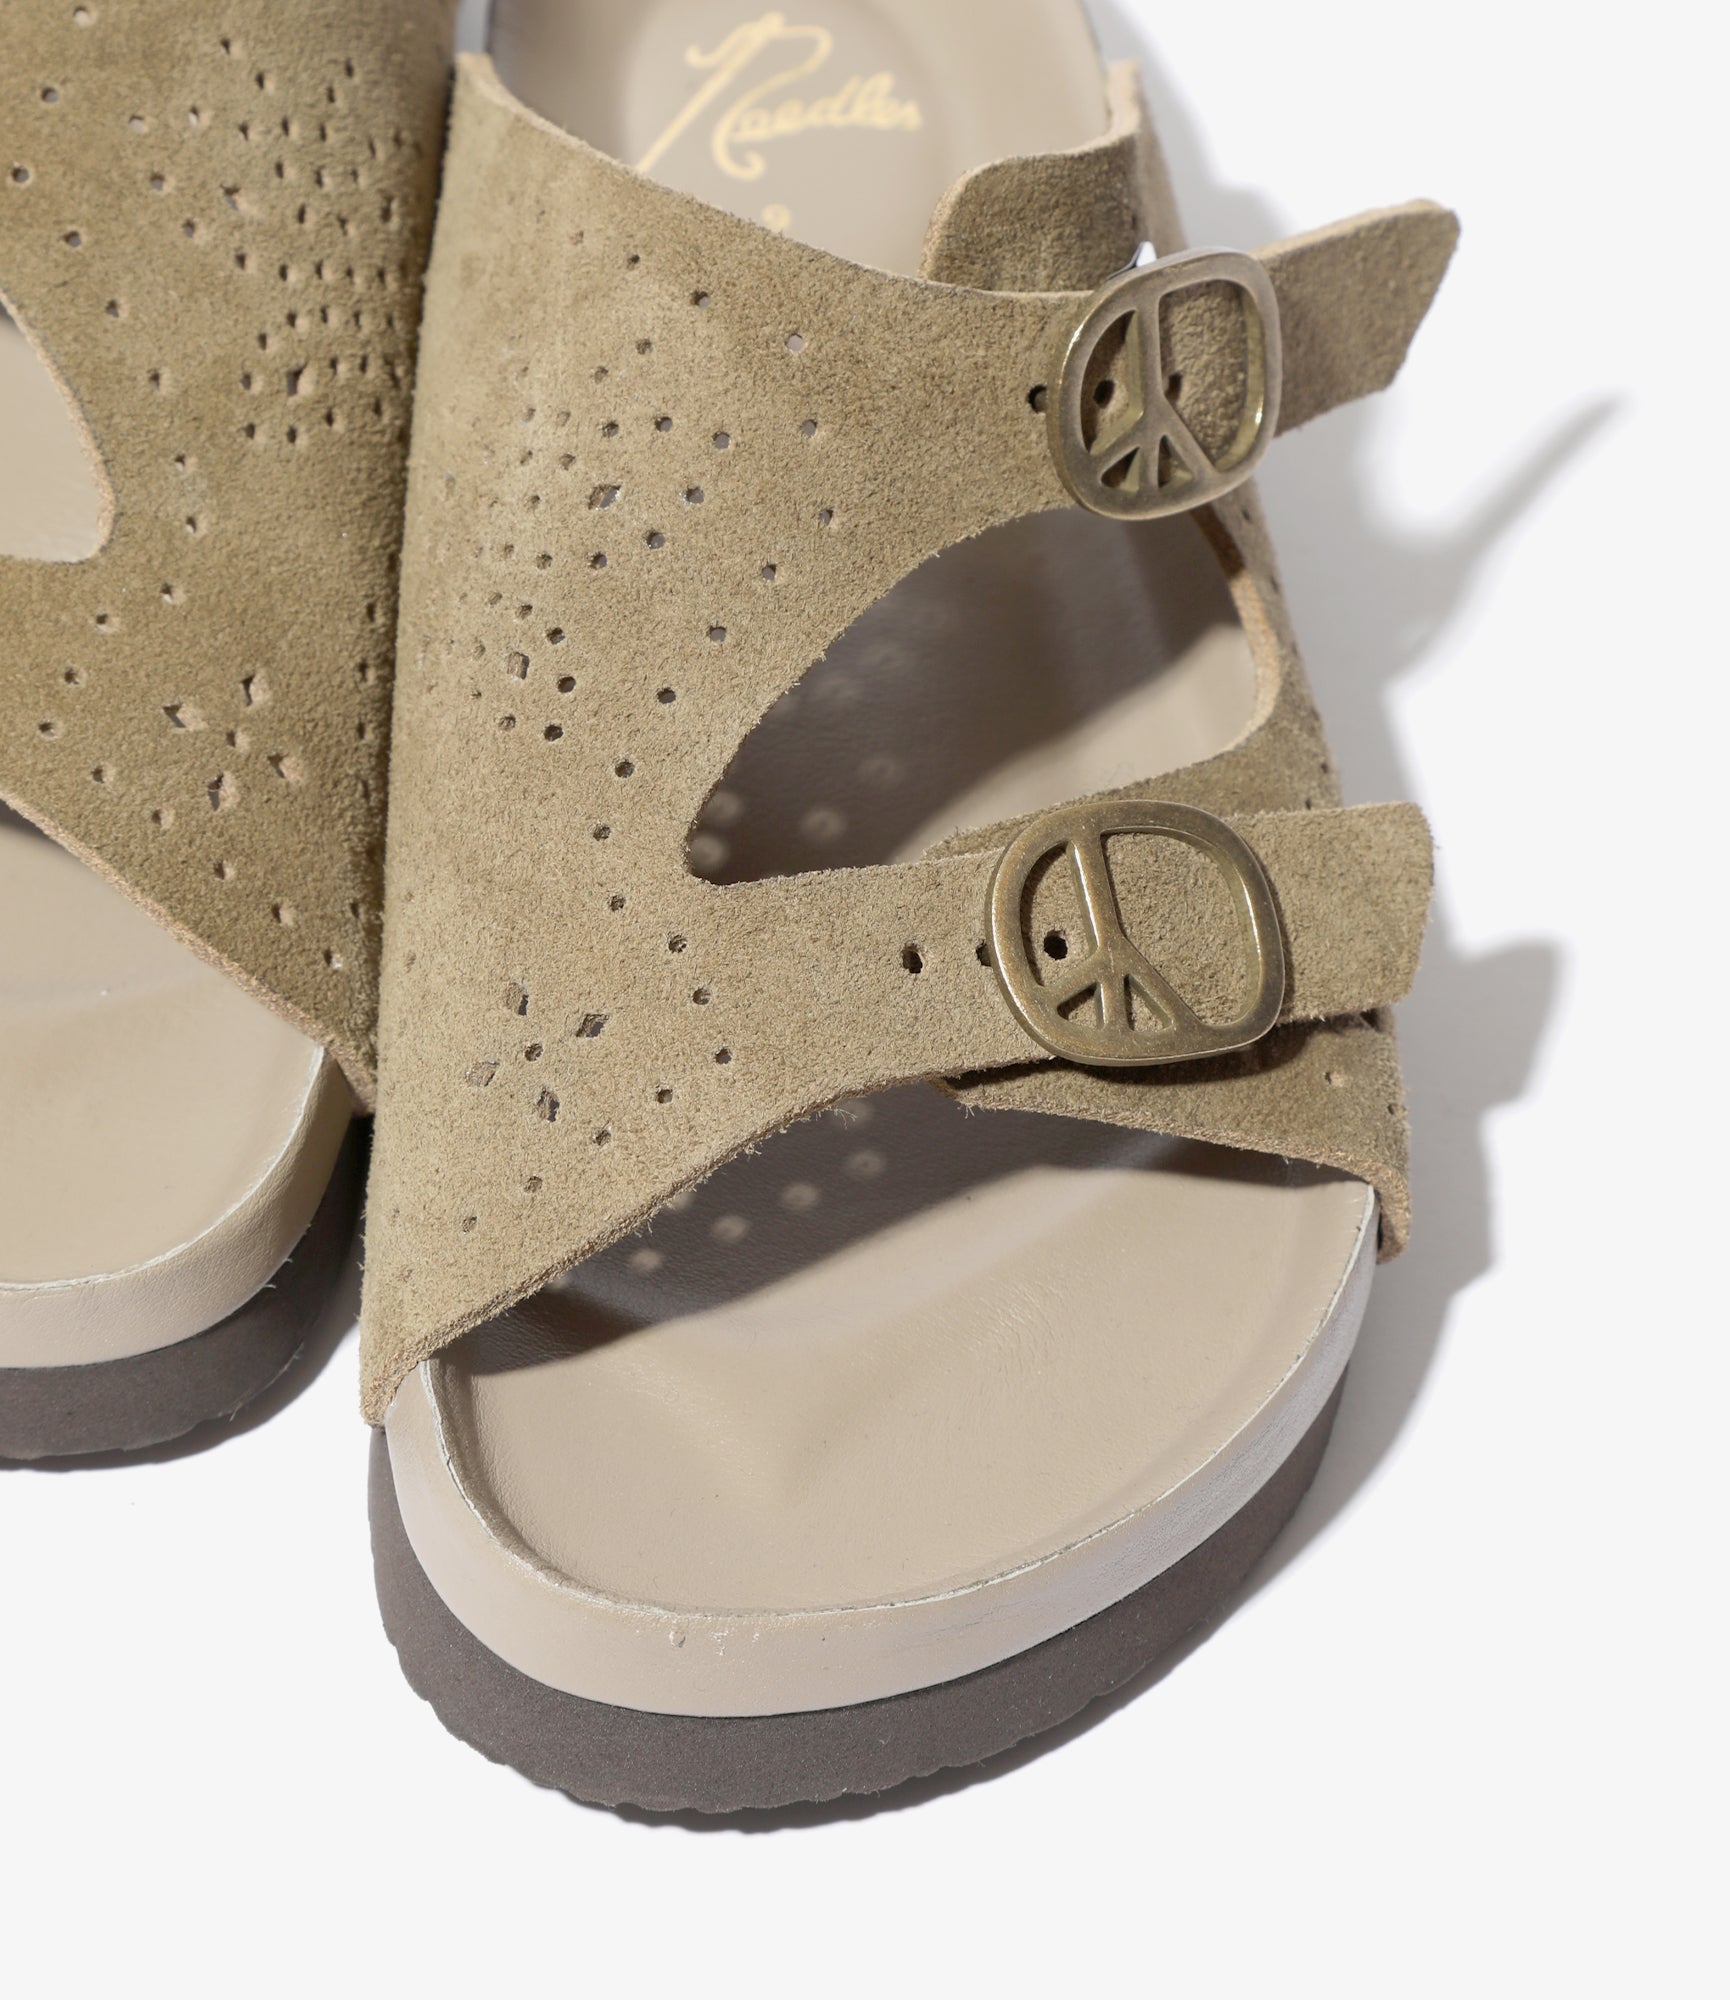 Double Strap Sandal - Taupe - Suede Leather